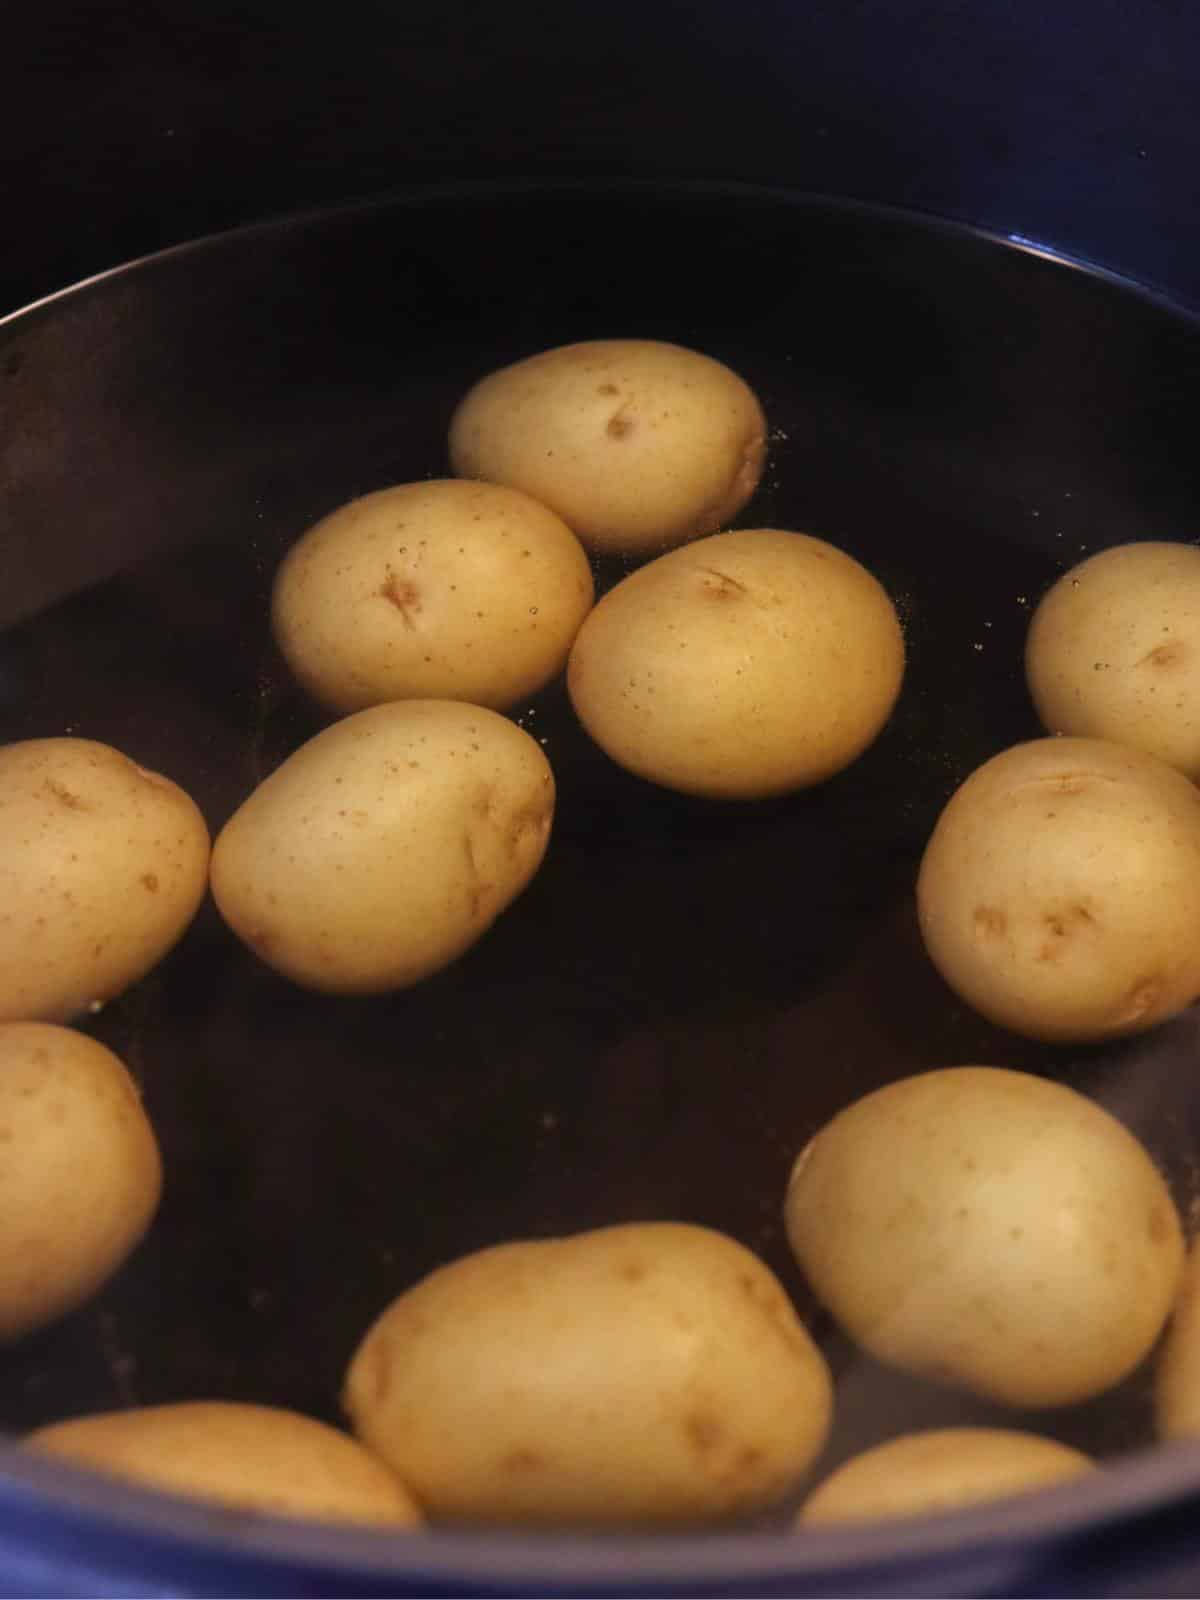 Small yellow potatoes boiling in a pot on the stove.